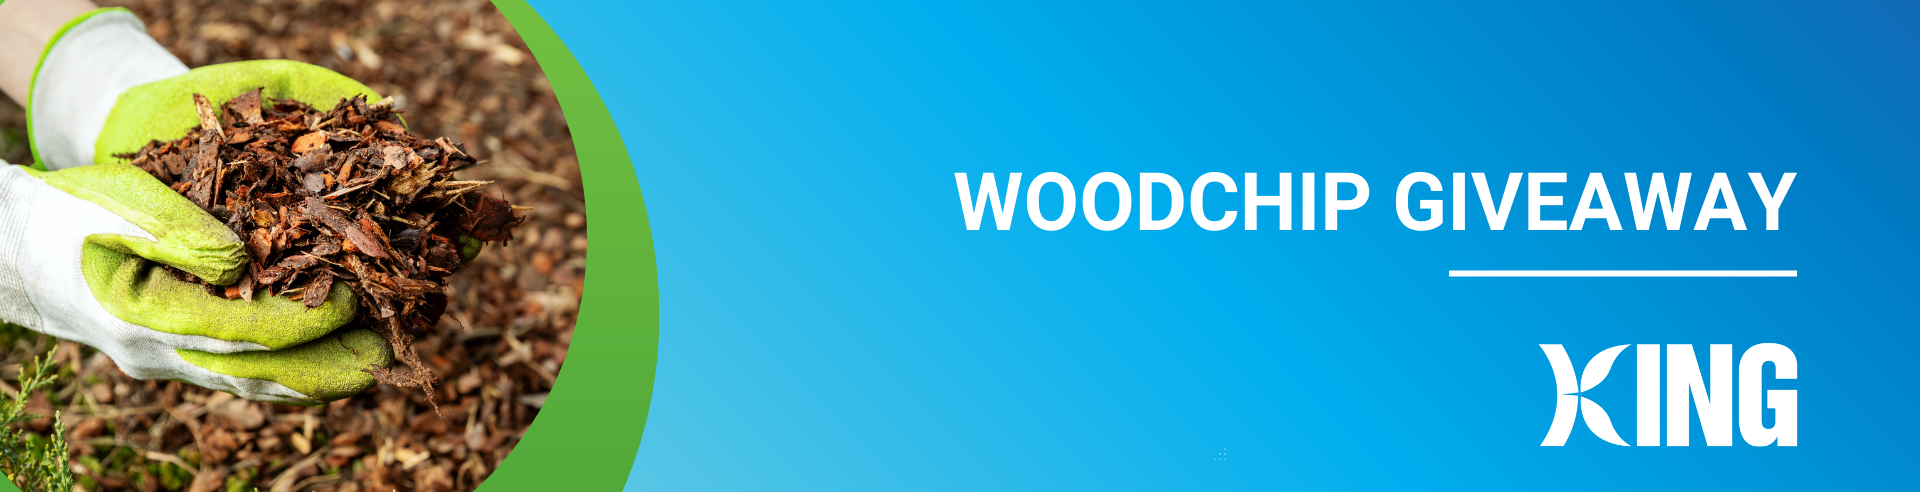 Woodchip Giveaway Banner